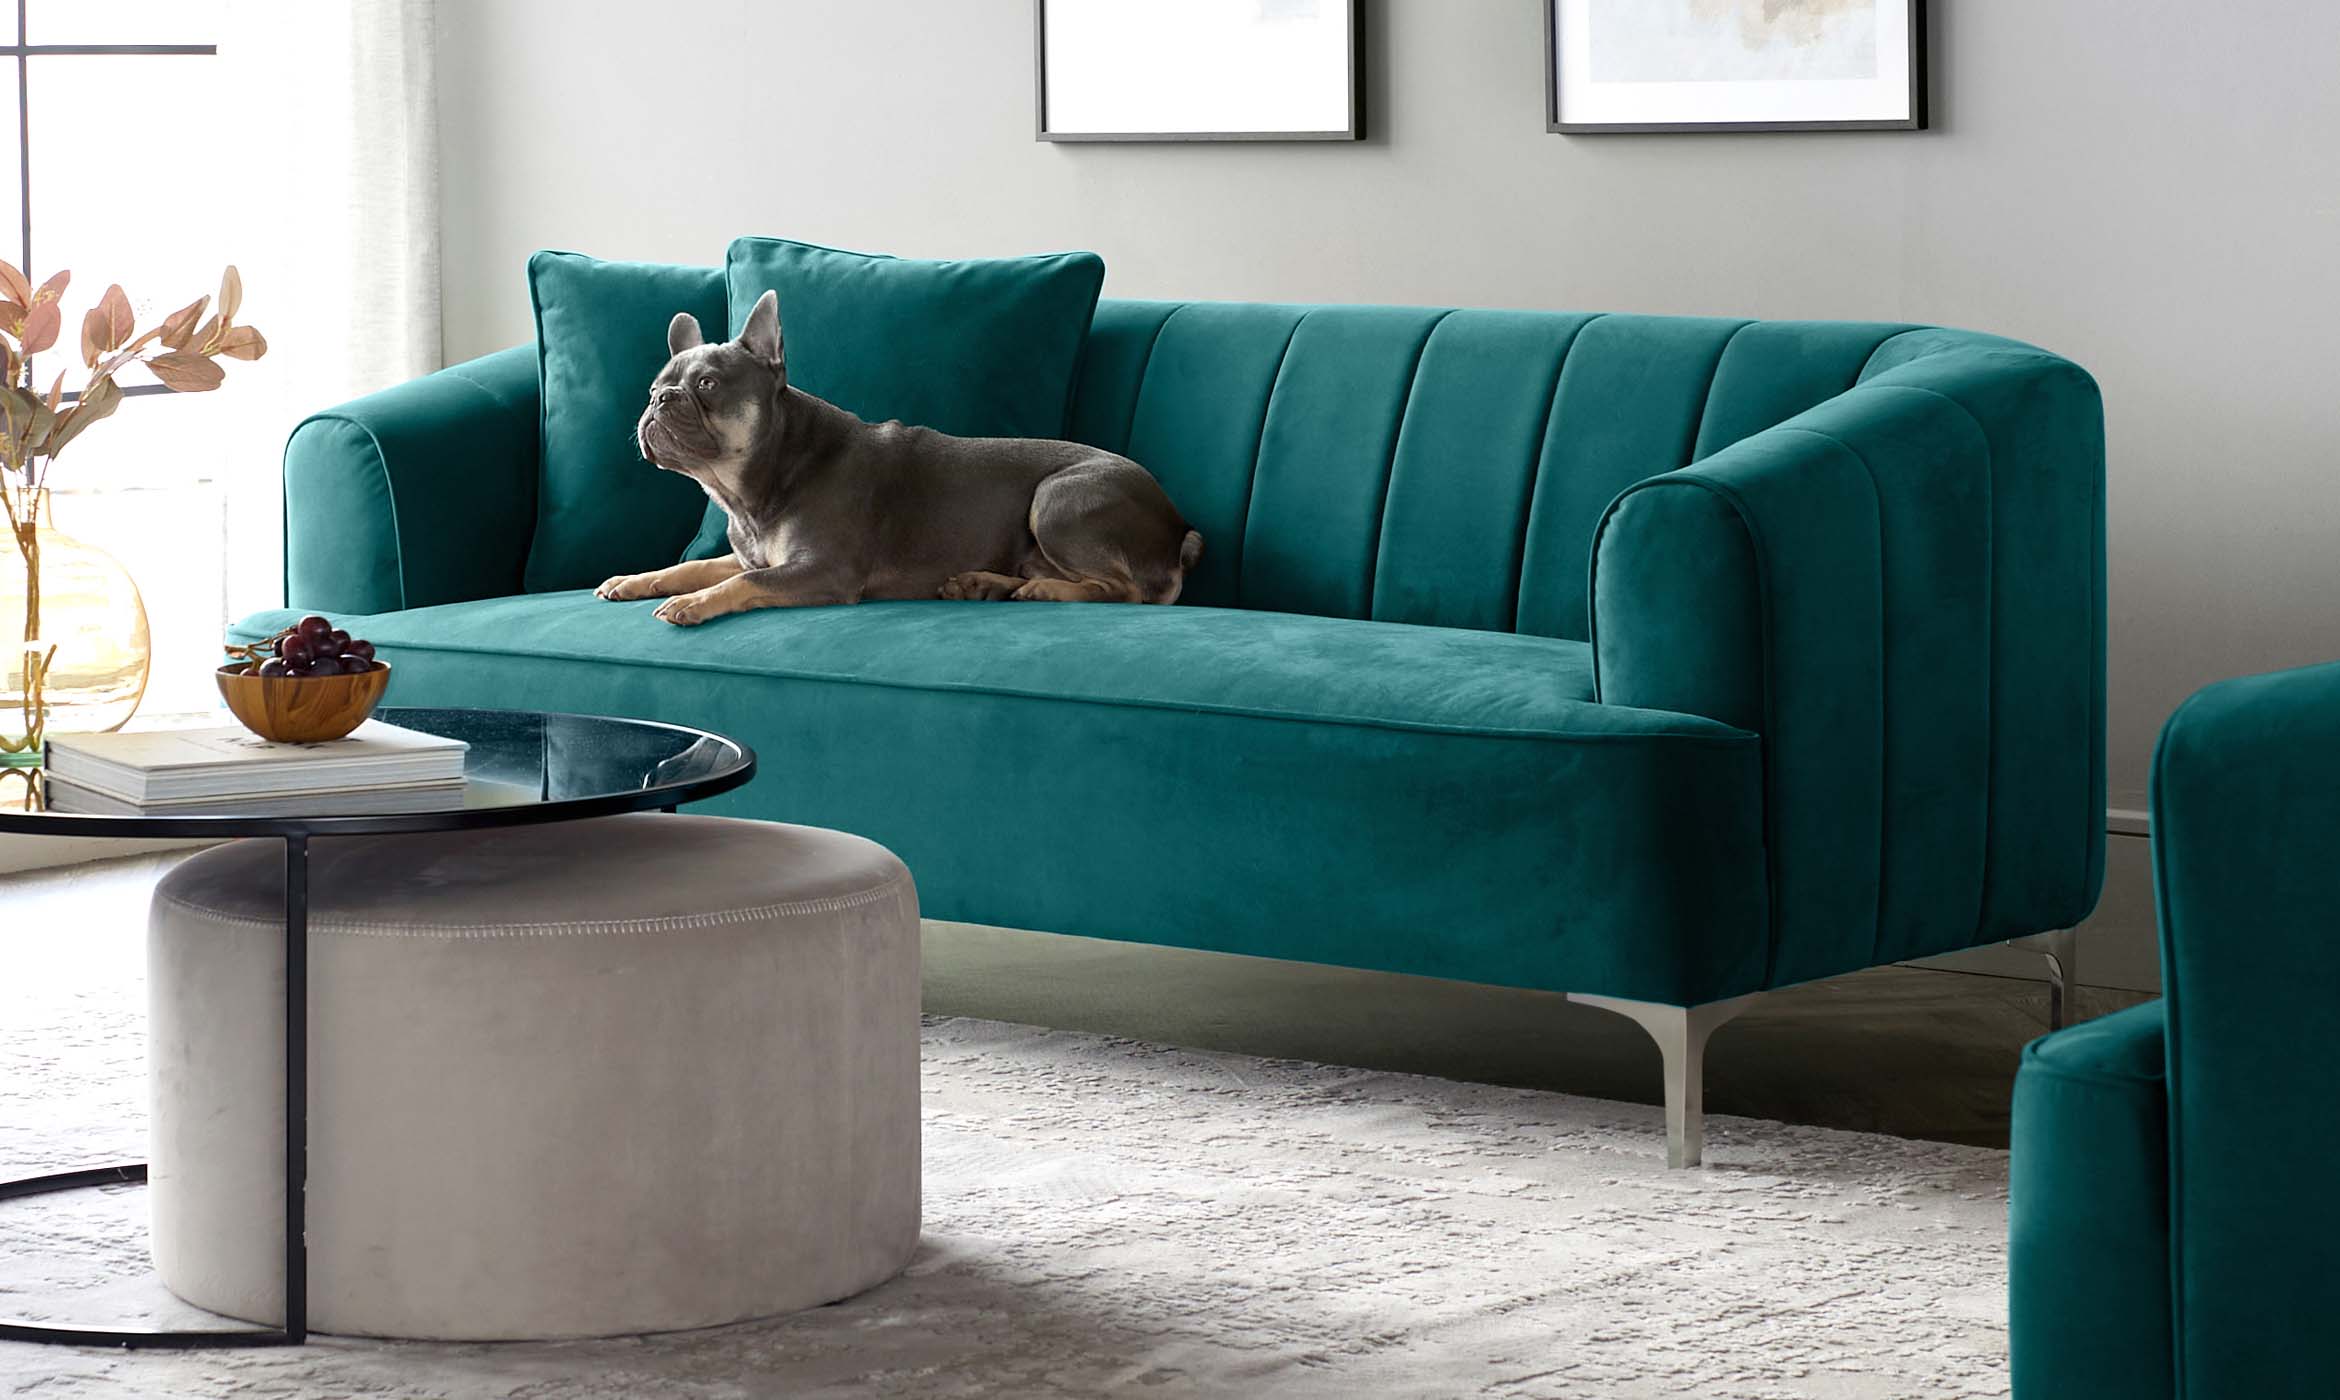 How To Clean A Velvet Sofa: Our Upholstery Care Tips